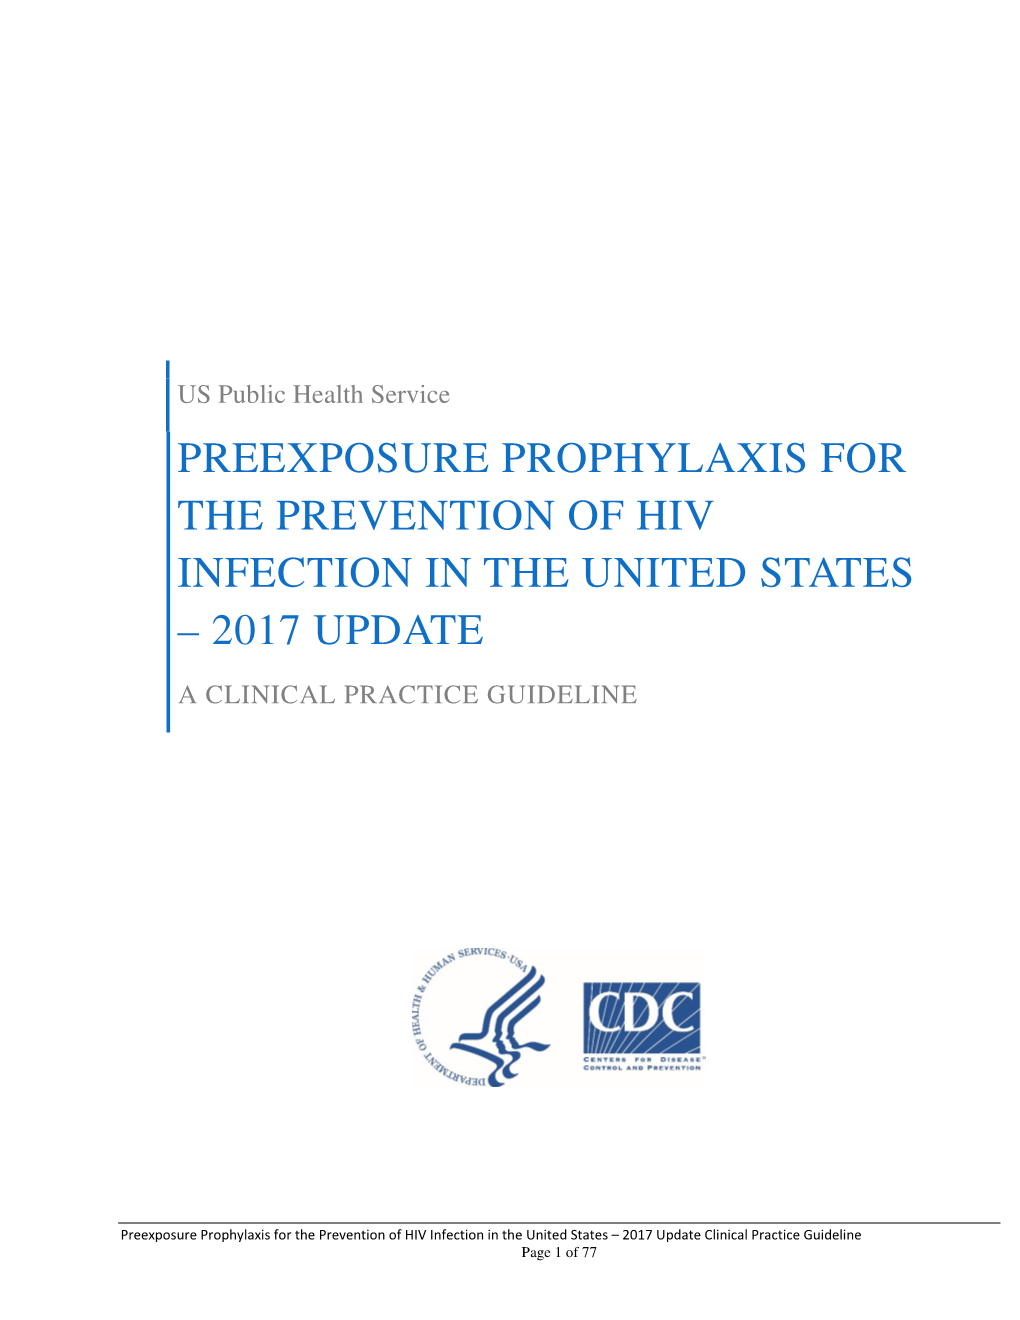 For the Prevention of Hiv Infection in the United States